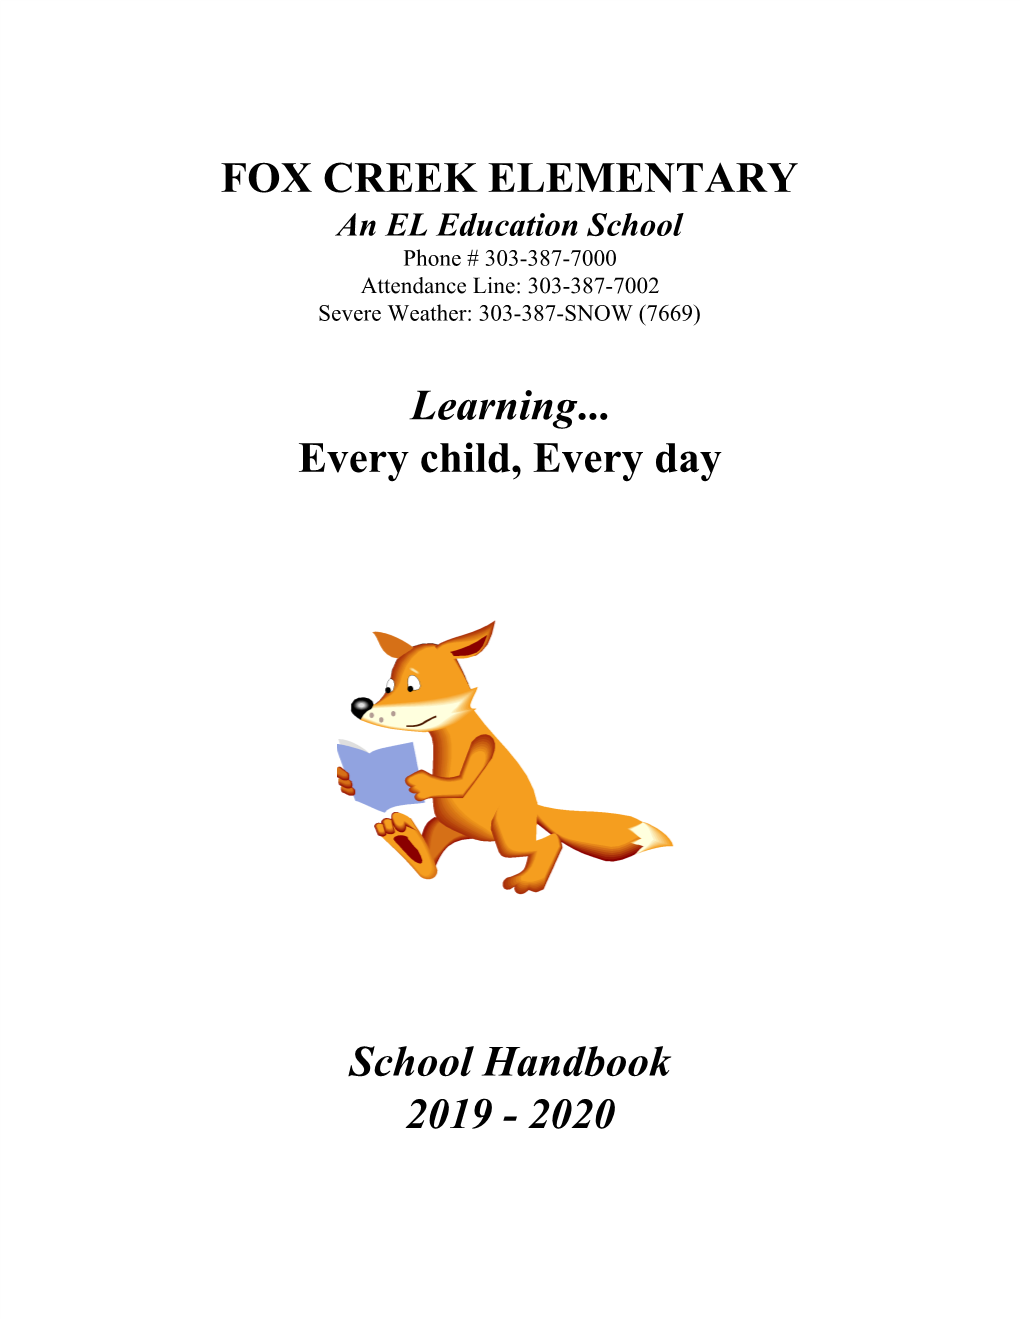 FOX CREEK ELEMENTARY Learning​... Every Child, Every Day School